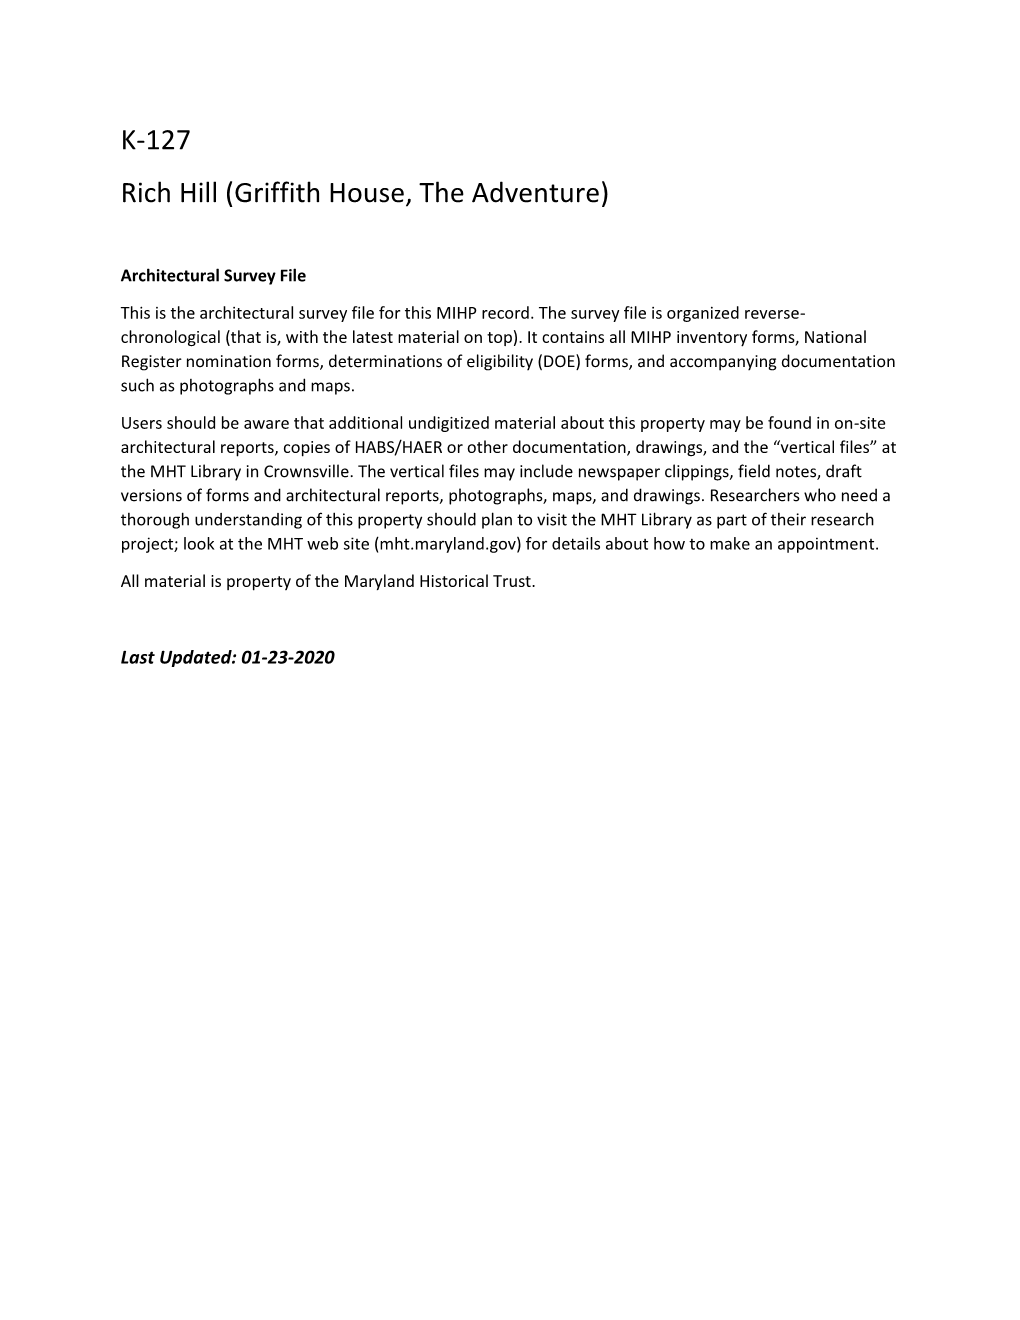 K-127 Rich Hill (Griffith House, the Adventure)